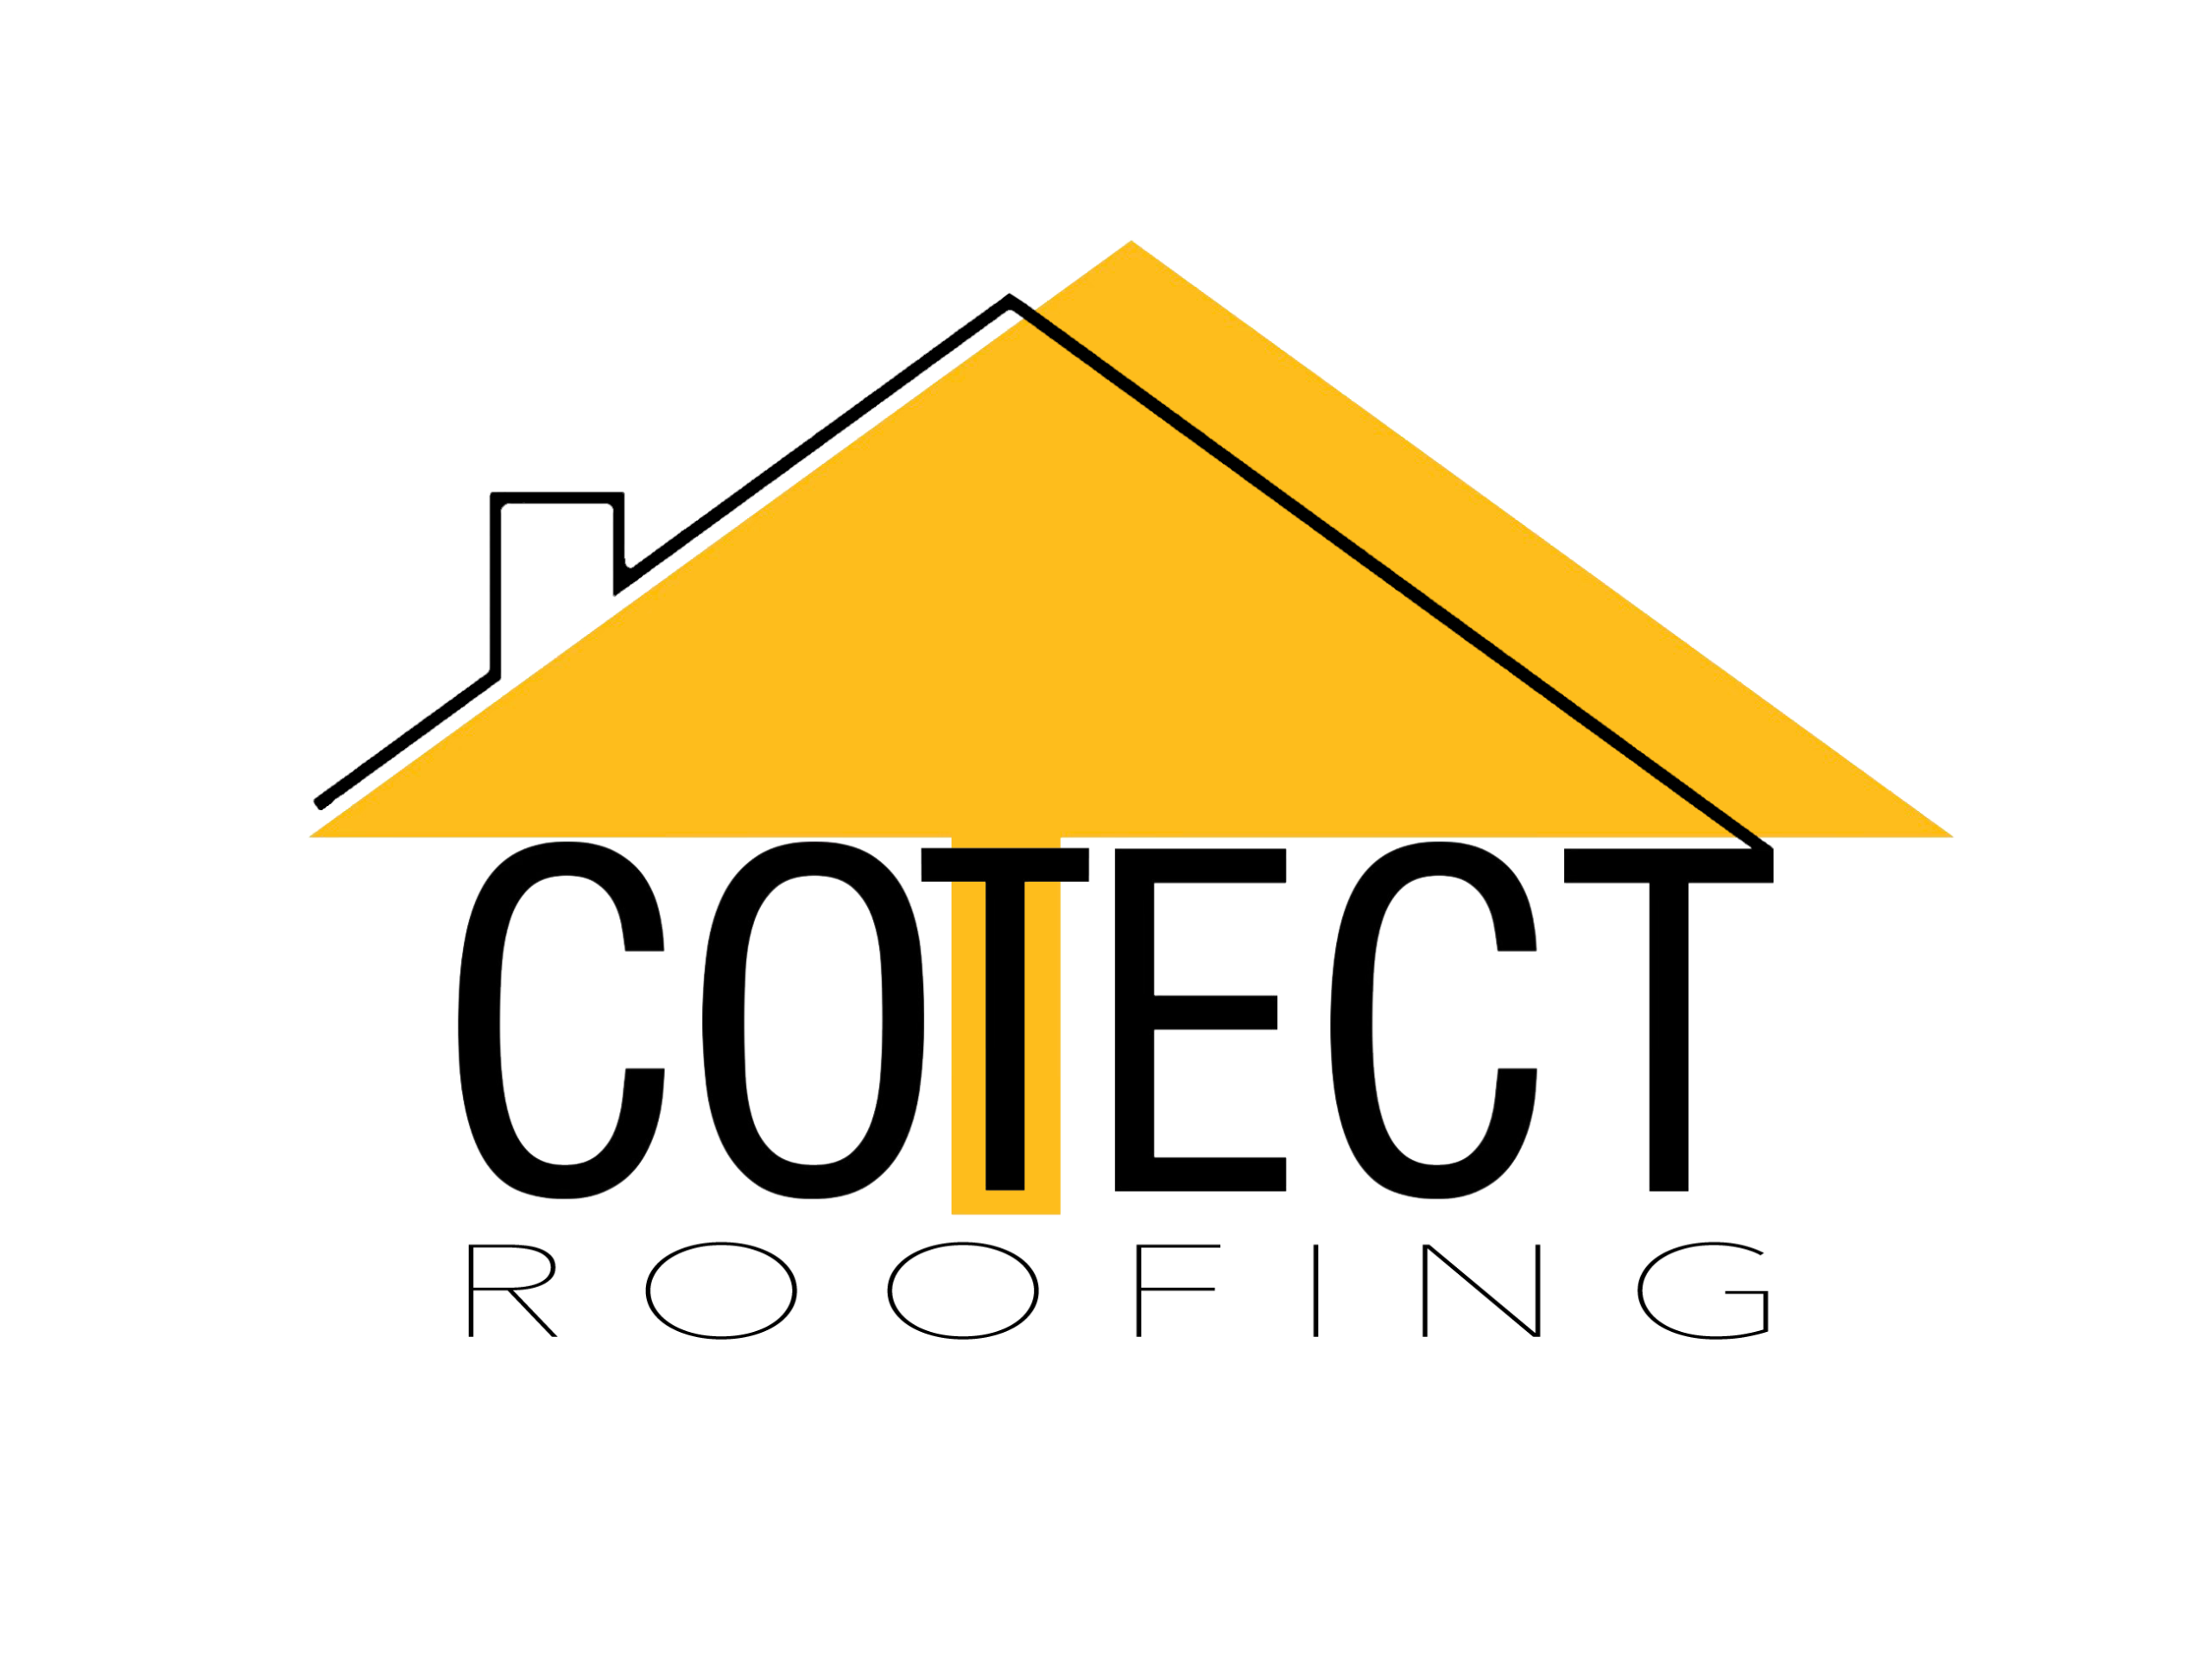 Cotect Roofing